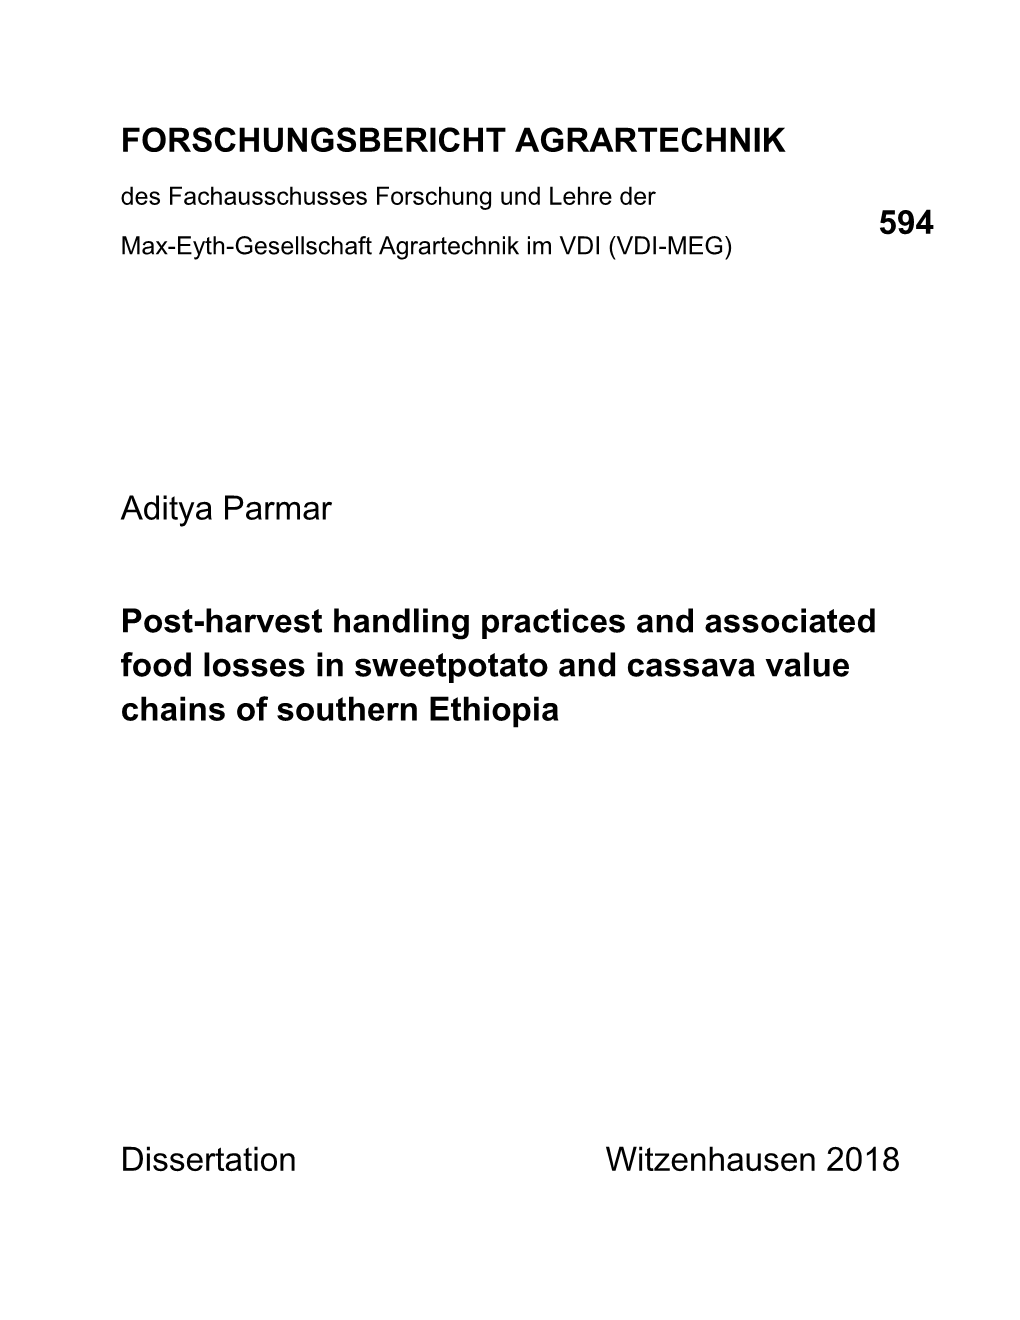 Post-Harvest Handling Practices and Associated Food Losses in Sweetpotato and Cassava Value Chains of Southern Ethiopia